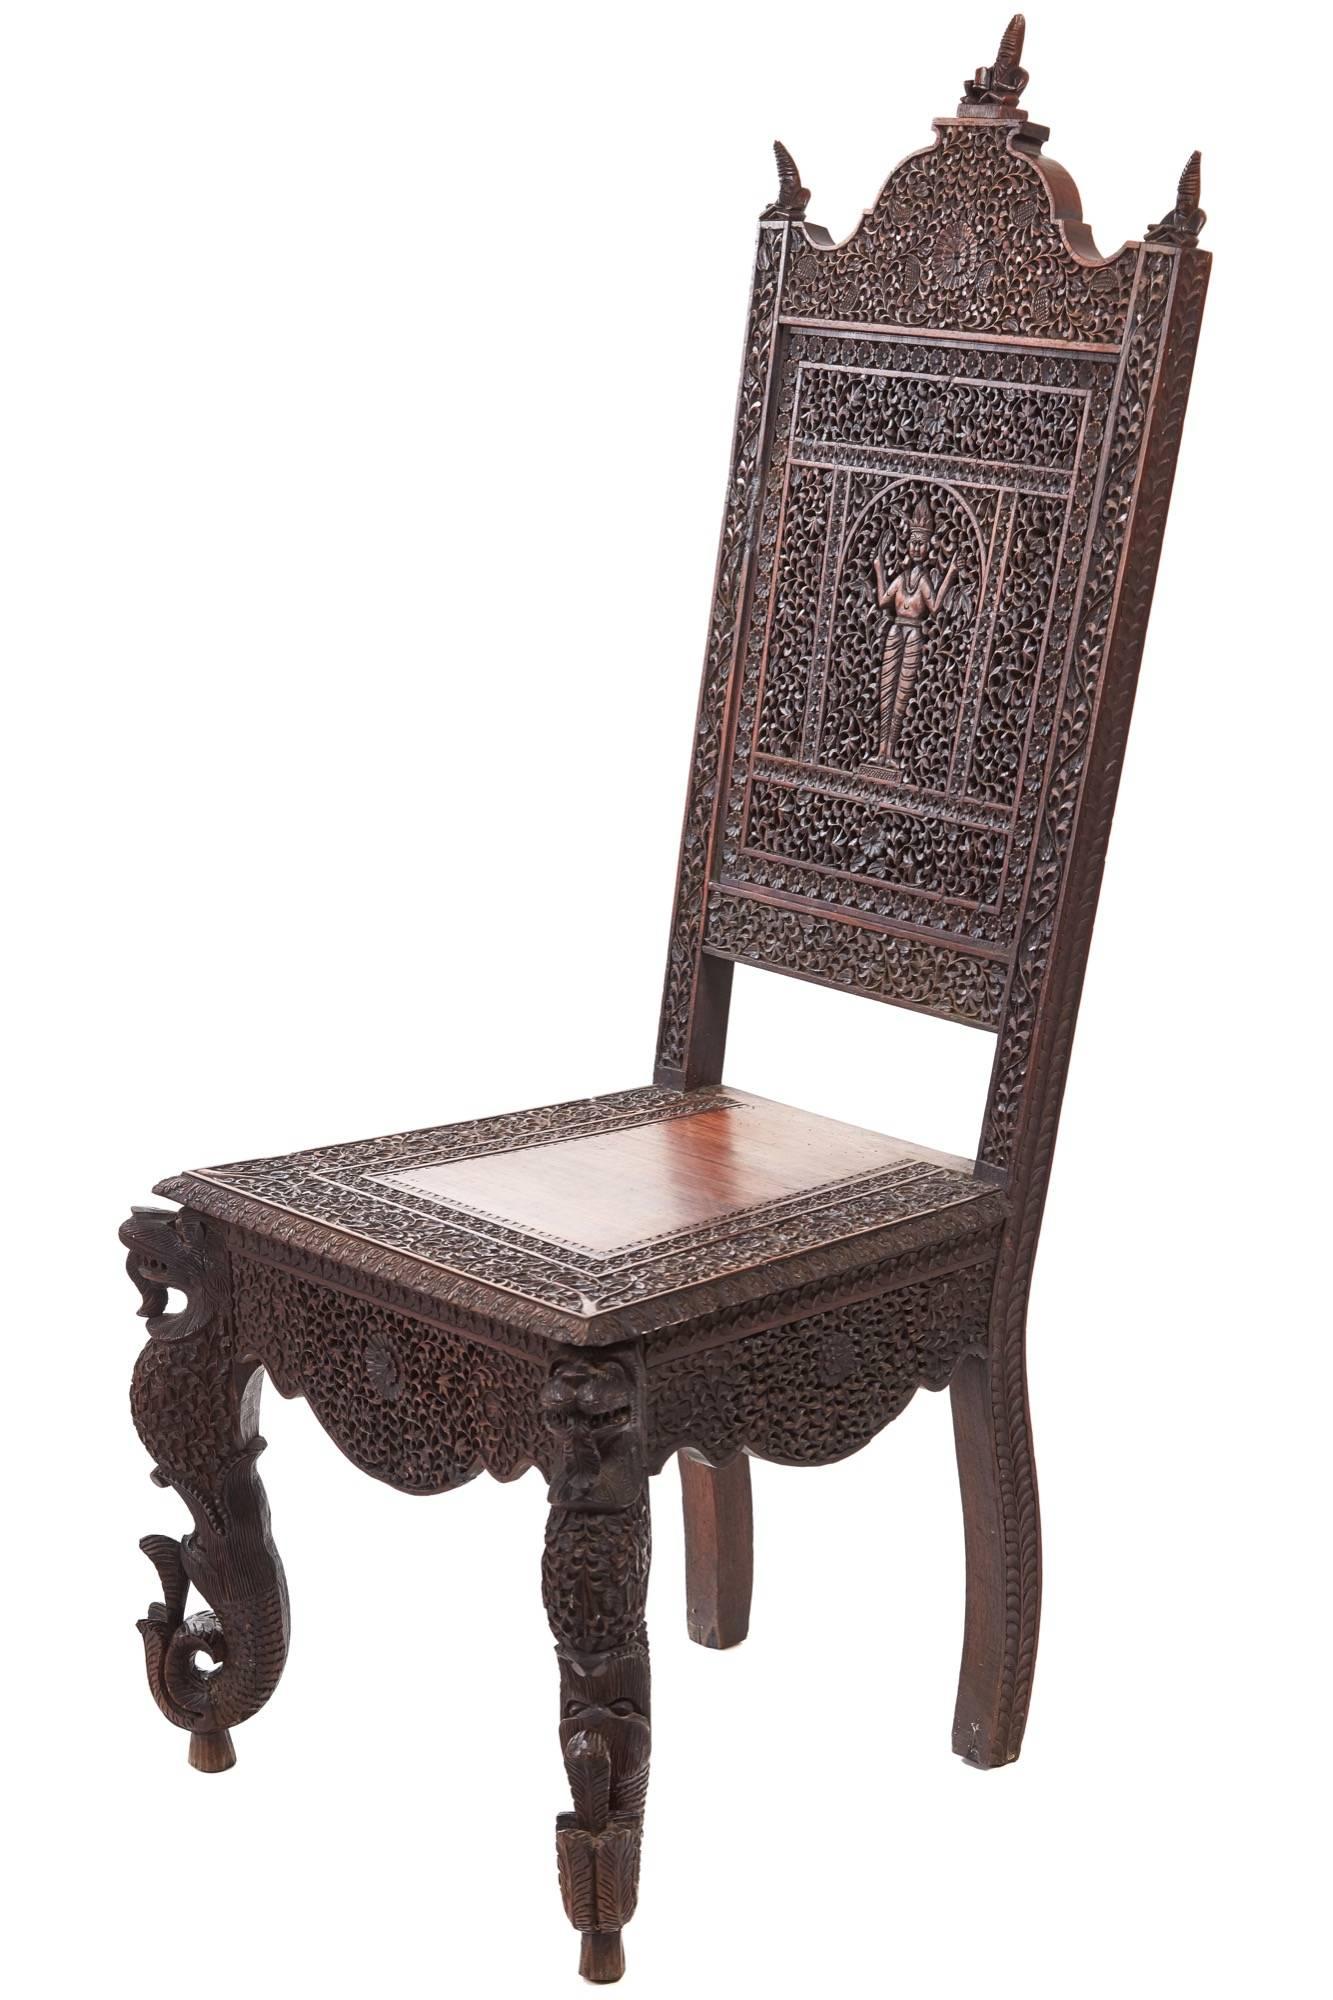 Unusual profusely pierced carved Indian rosewood side chair, the shaped top rail decorated with three seated figures, the back profusely pierced carved with a figure and flowers, lovely pierced carved shaped apron, supported by unusual shaped front